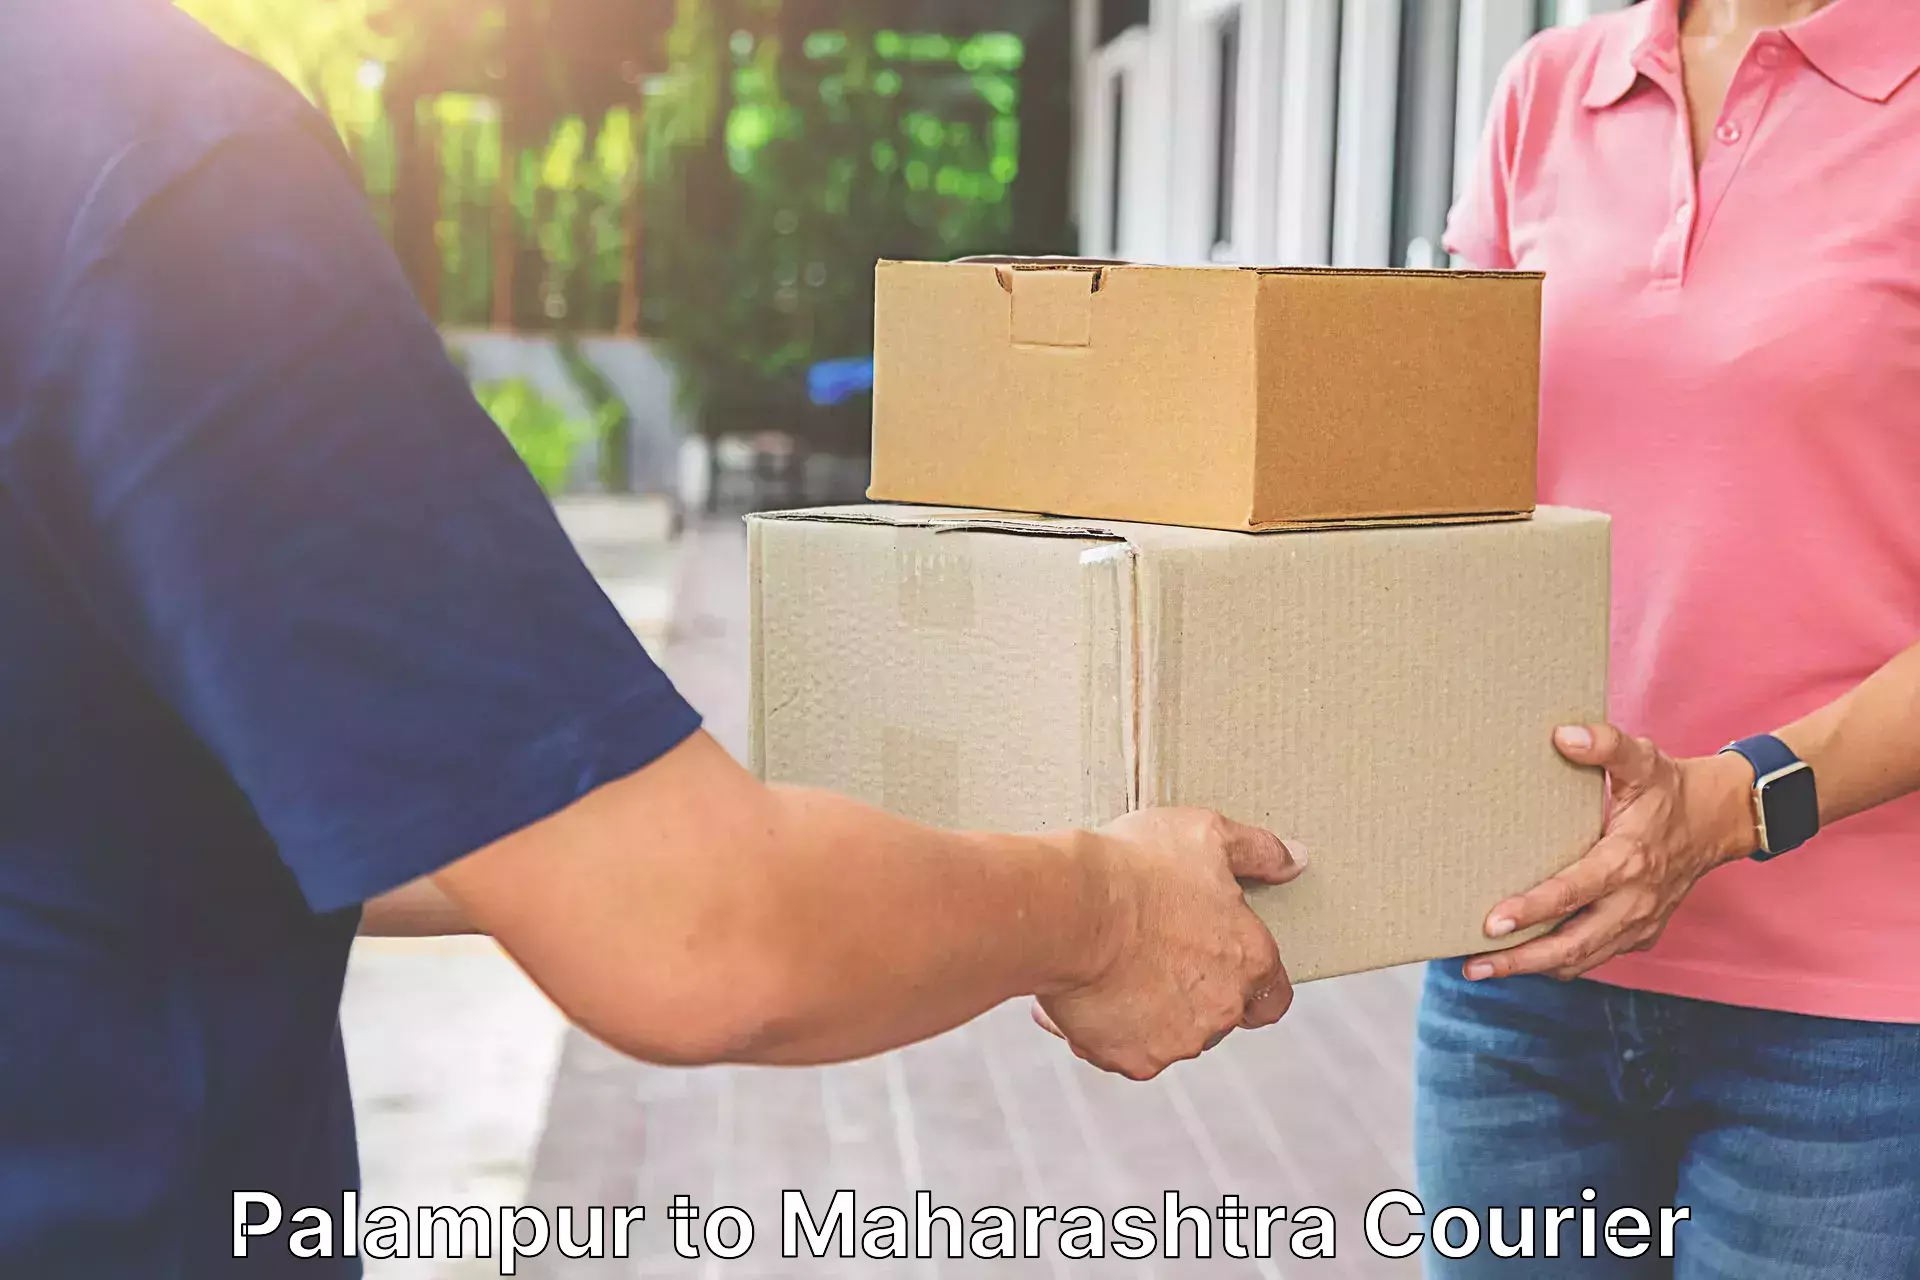 Automated parcel services Palampur to Maharashtra